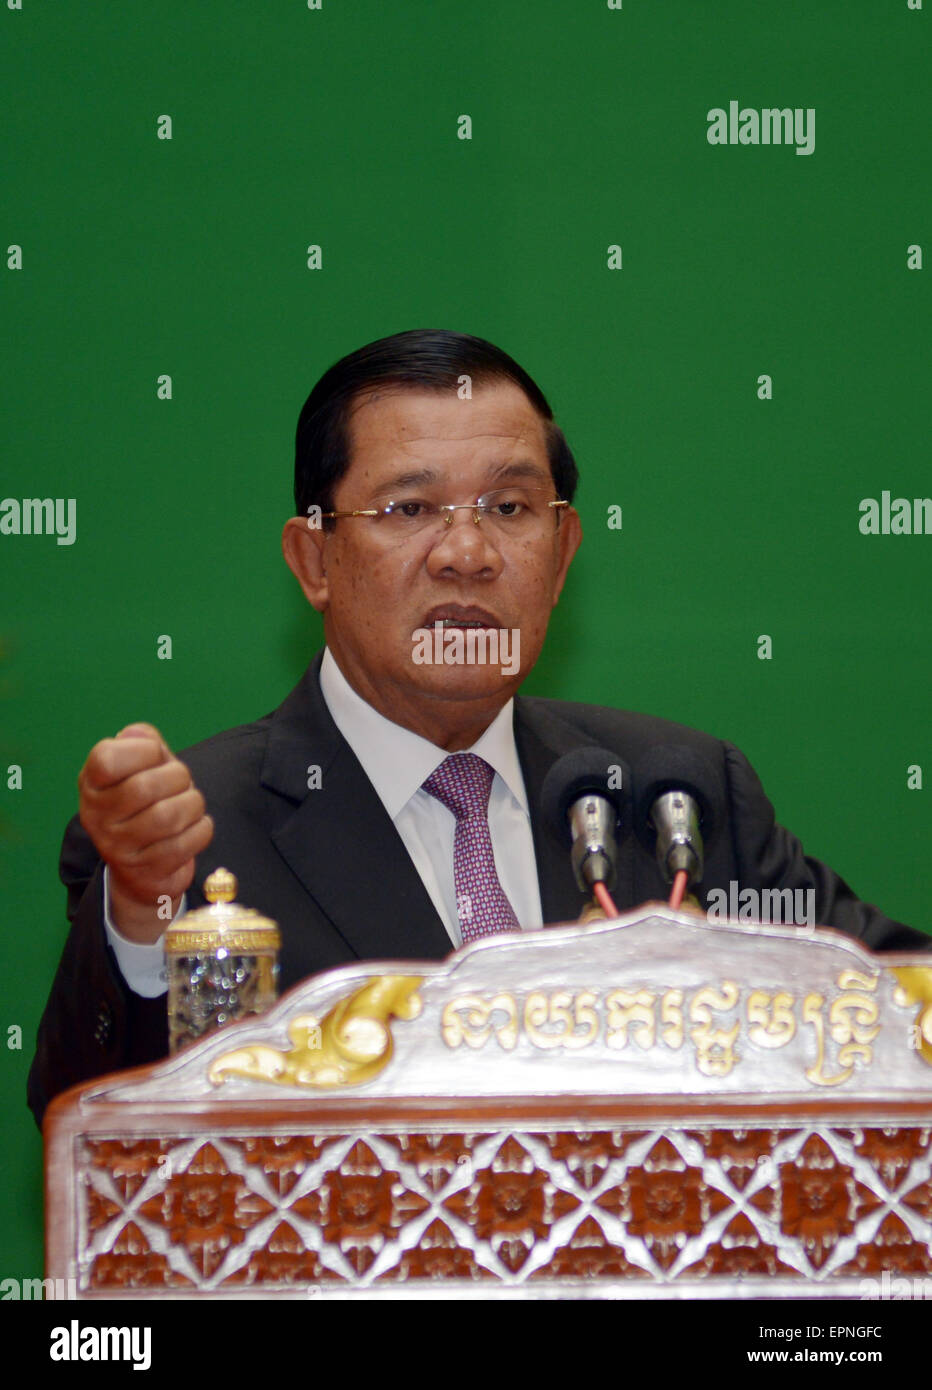 Phnom Penh, Cambodia. 20th May, 2015. Cambodian Prime Minister Hun Sen speaks during an annual meeting on public financial management reform program in Phnom Penh, Cambodia, on May 20, 2015. Hun Sen said Wednesday that the Southeast Asian country has maintained good political and macroeconomic stability in the last two decades. © Sovannara/Xinhua/Alamy Live News Stock Photo